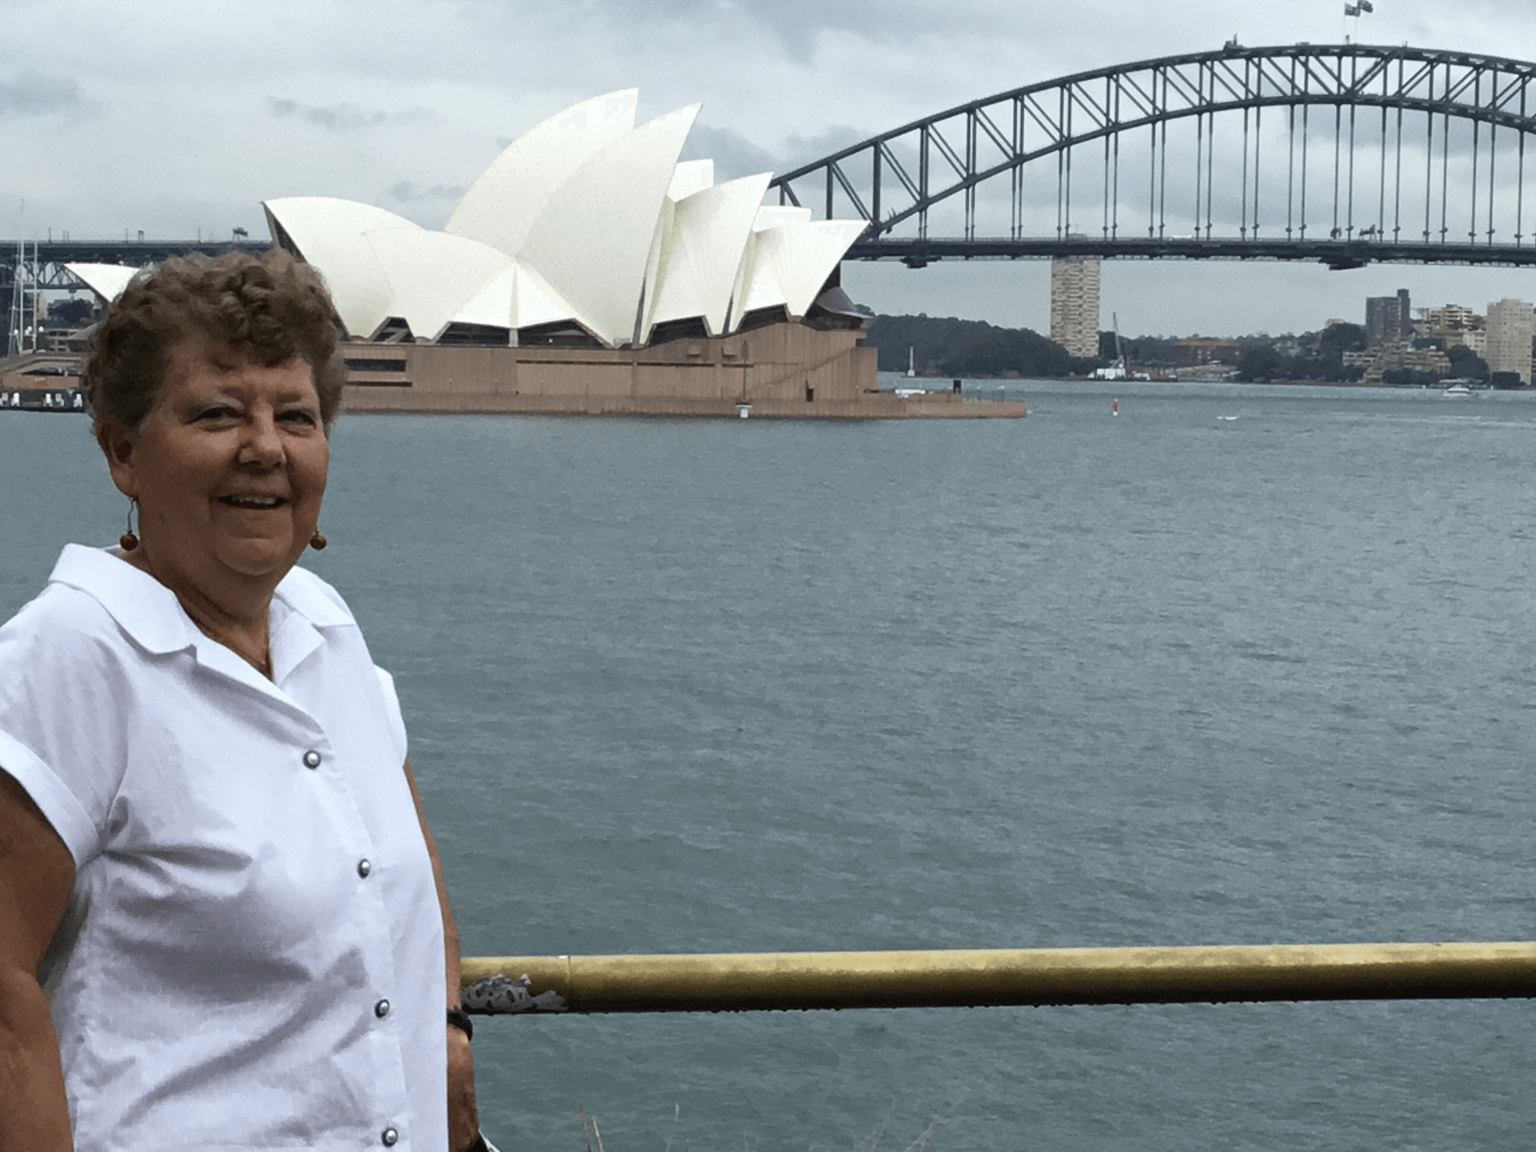 Deborah Graves in Sydney, Australia with the Sydney Opera House in the background